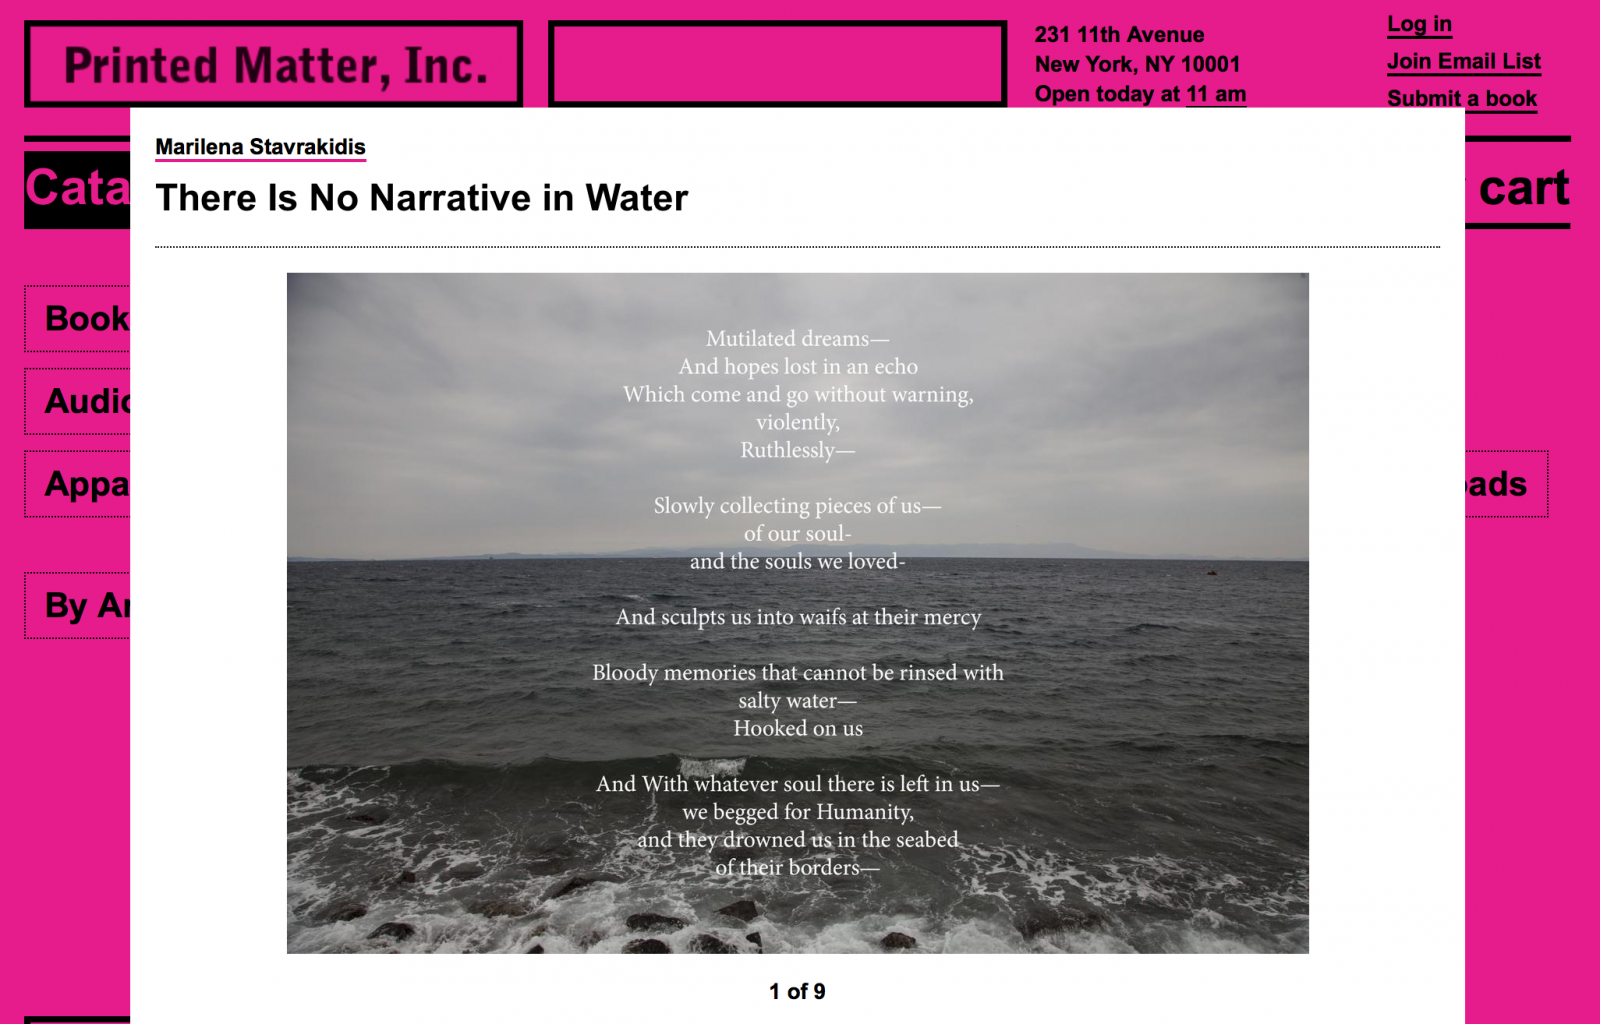 There Is No Narrative In Water now available at Printed Matter